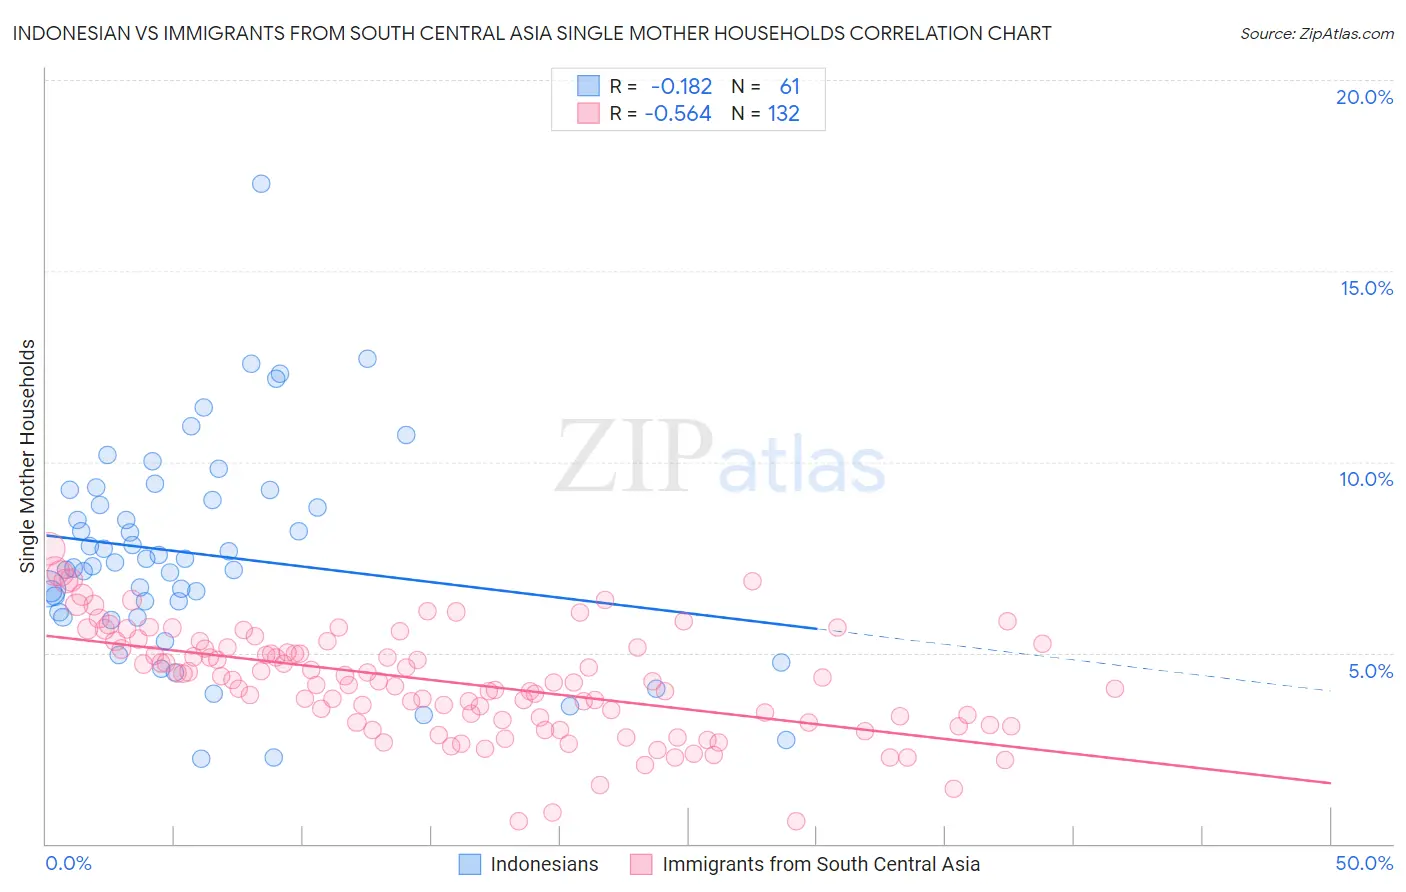 Indonesian vs Immigrants from South Central Asia Single Mother Households